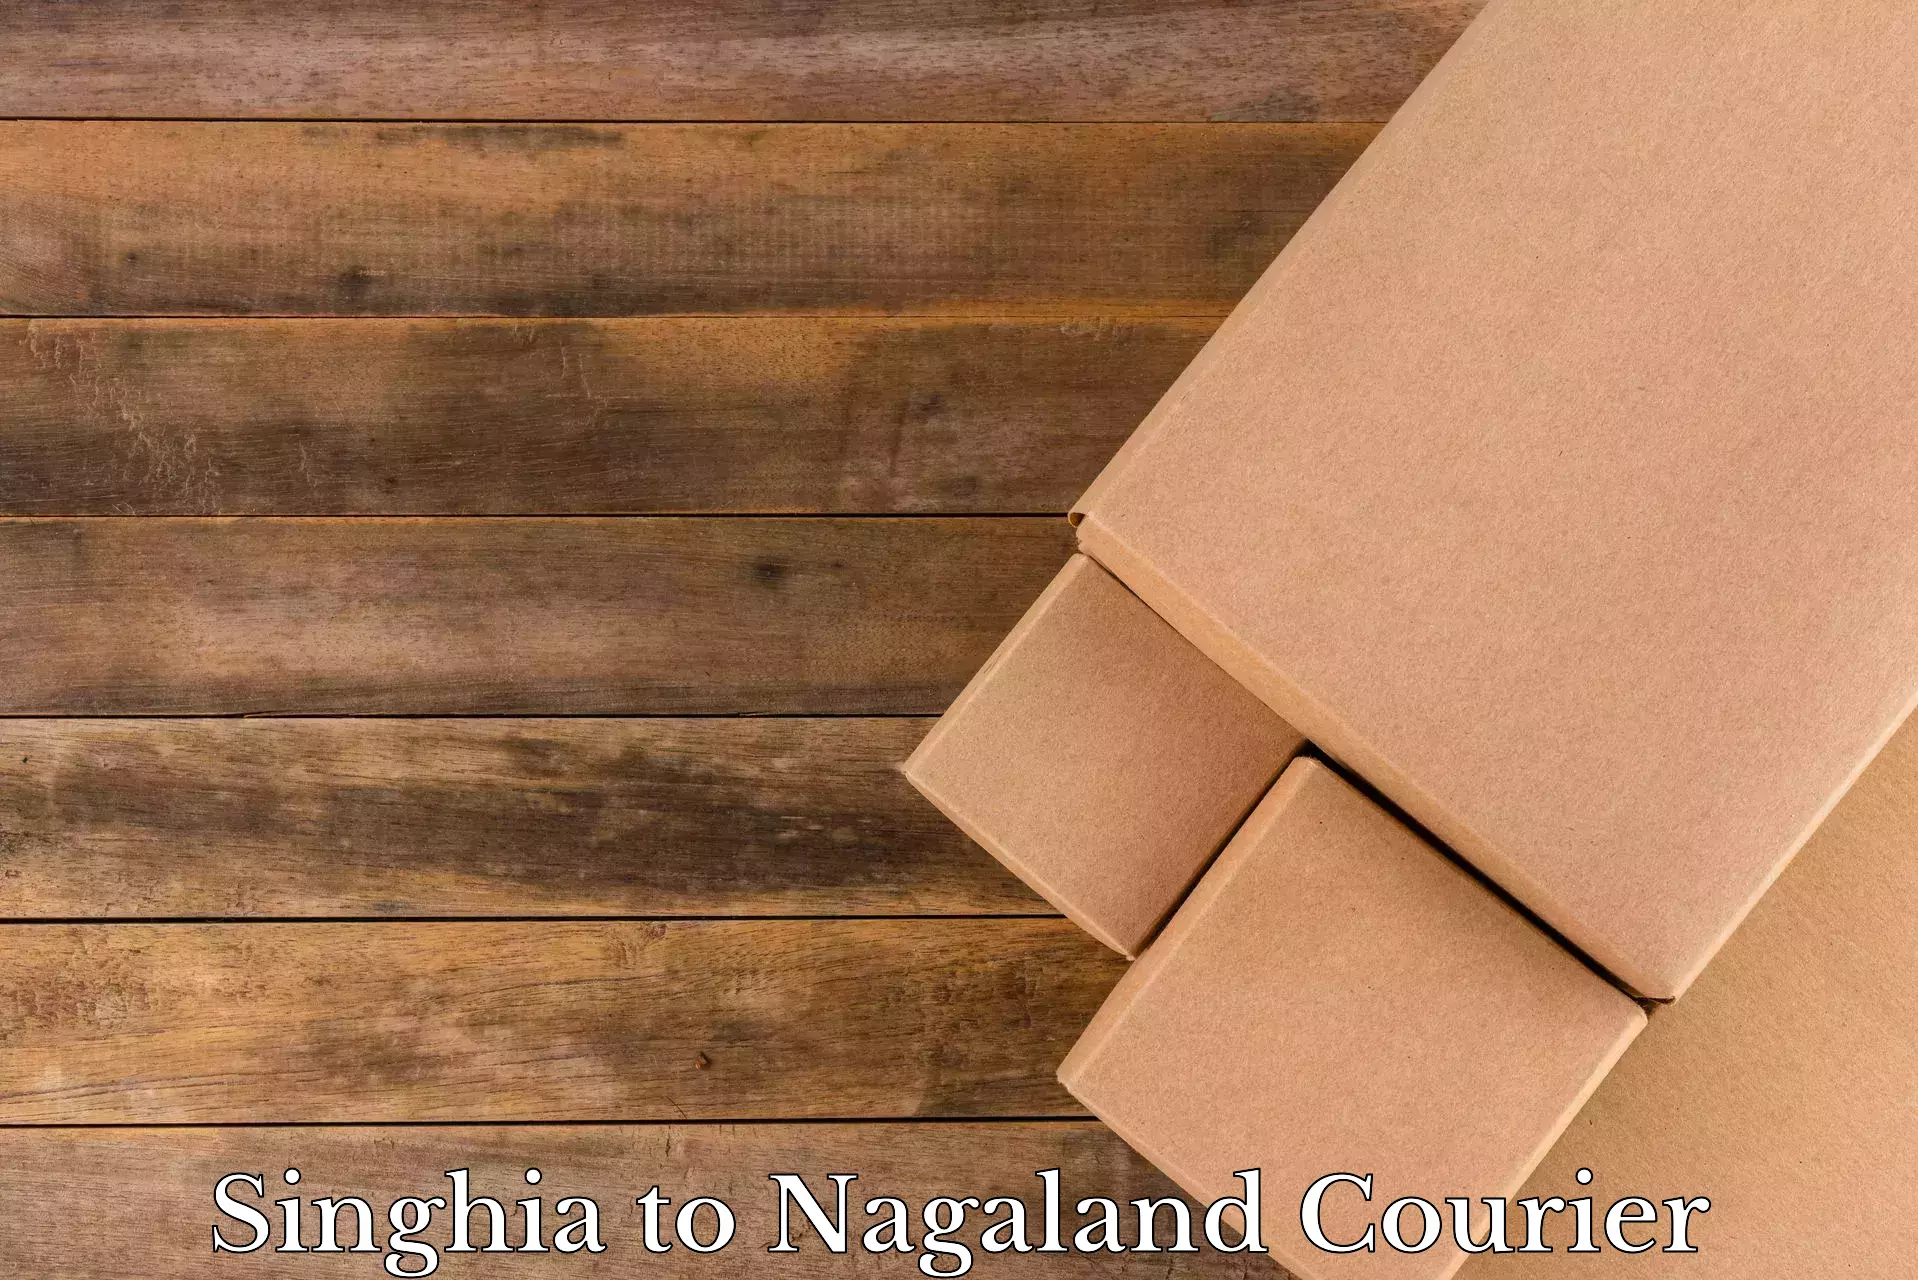 Full-service movers Singhia to Nagaland